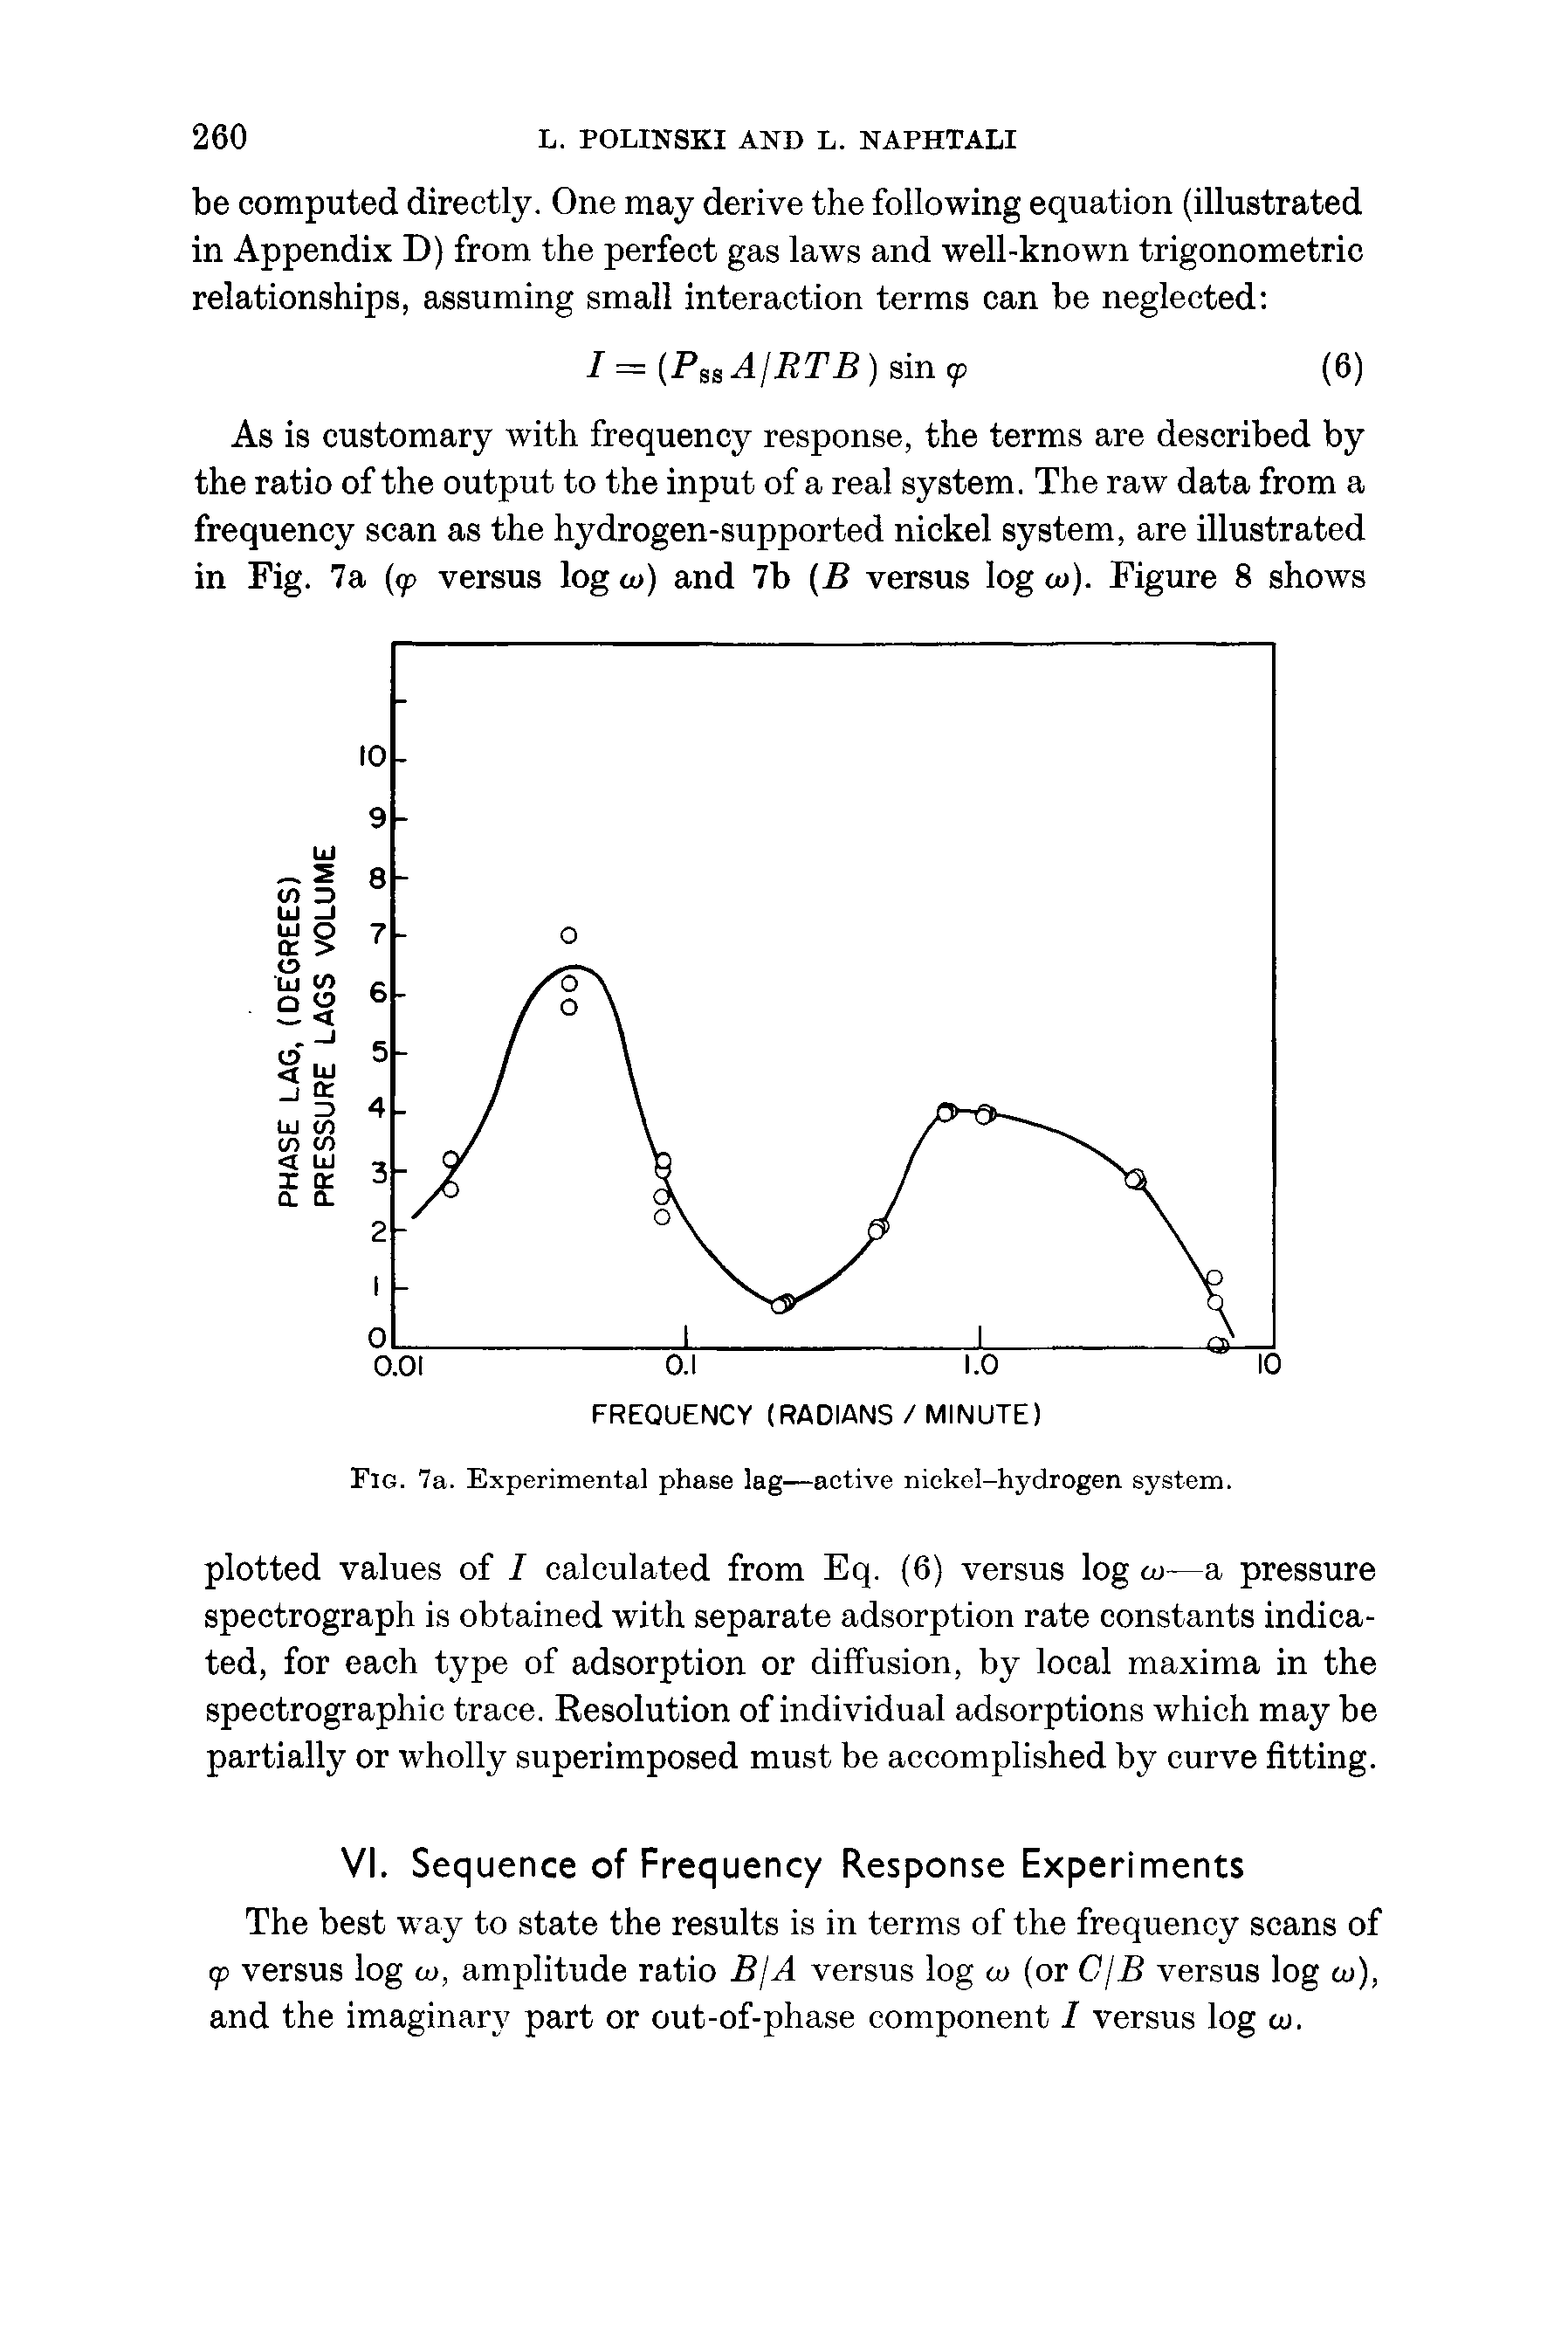 Fig. 7a. Experimental phase lag—active nickel-hydrogen system.